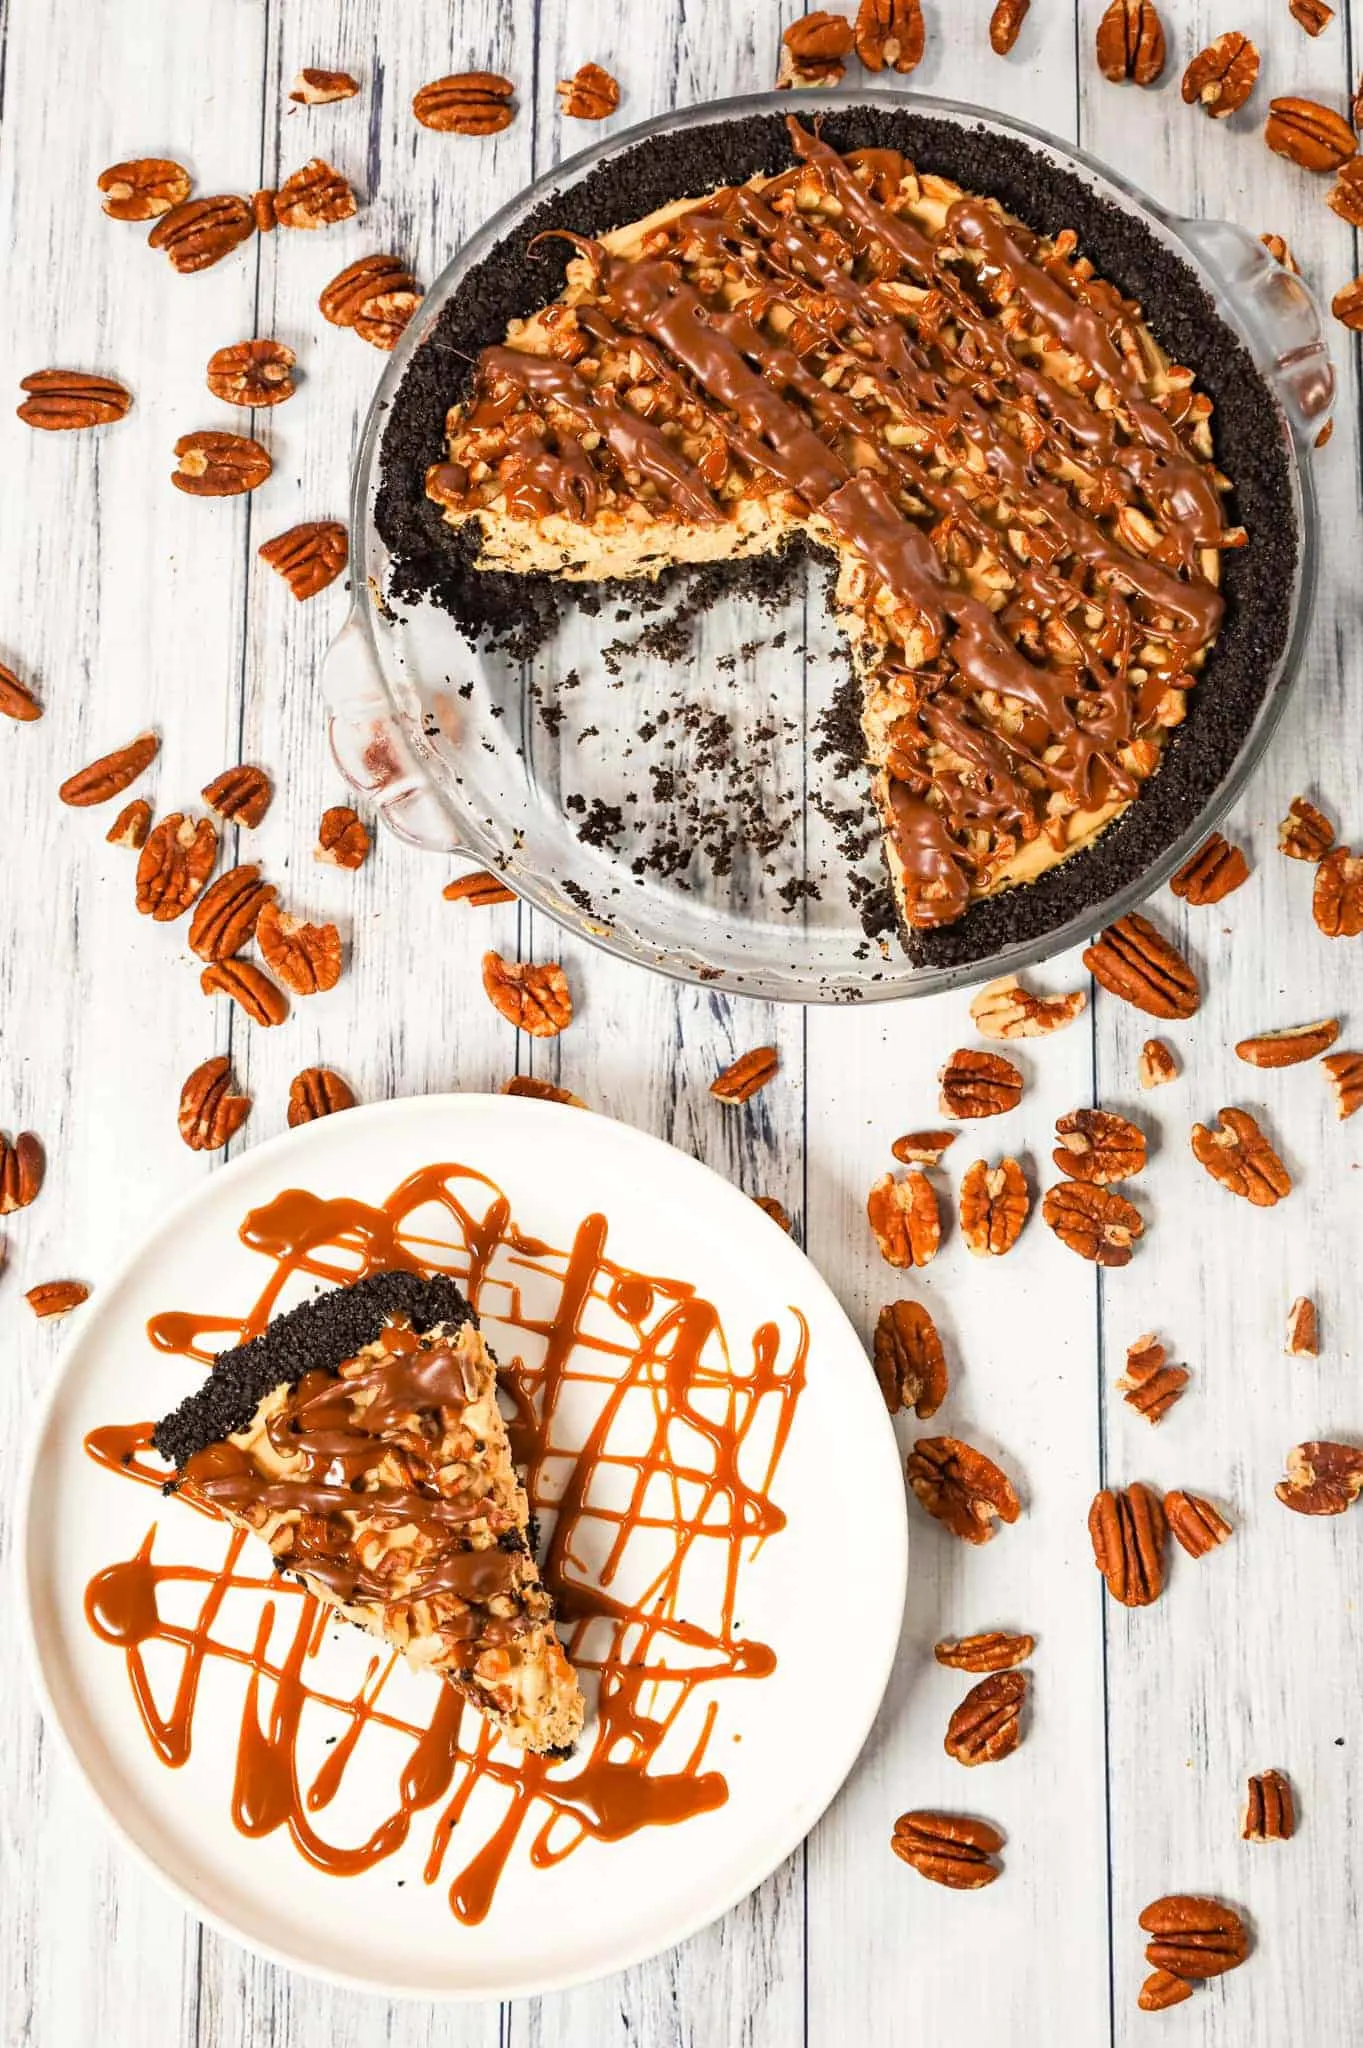 Turtle Pie is a delicious no bake cheesecake pie in an Oreo crust and loaded with caramel sauce, milk chocolate and chopped pecans.